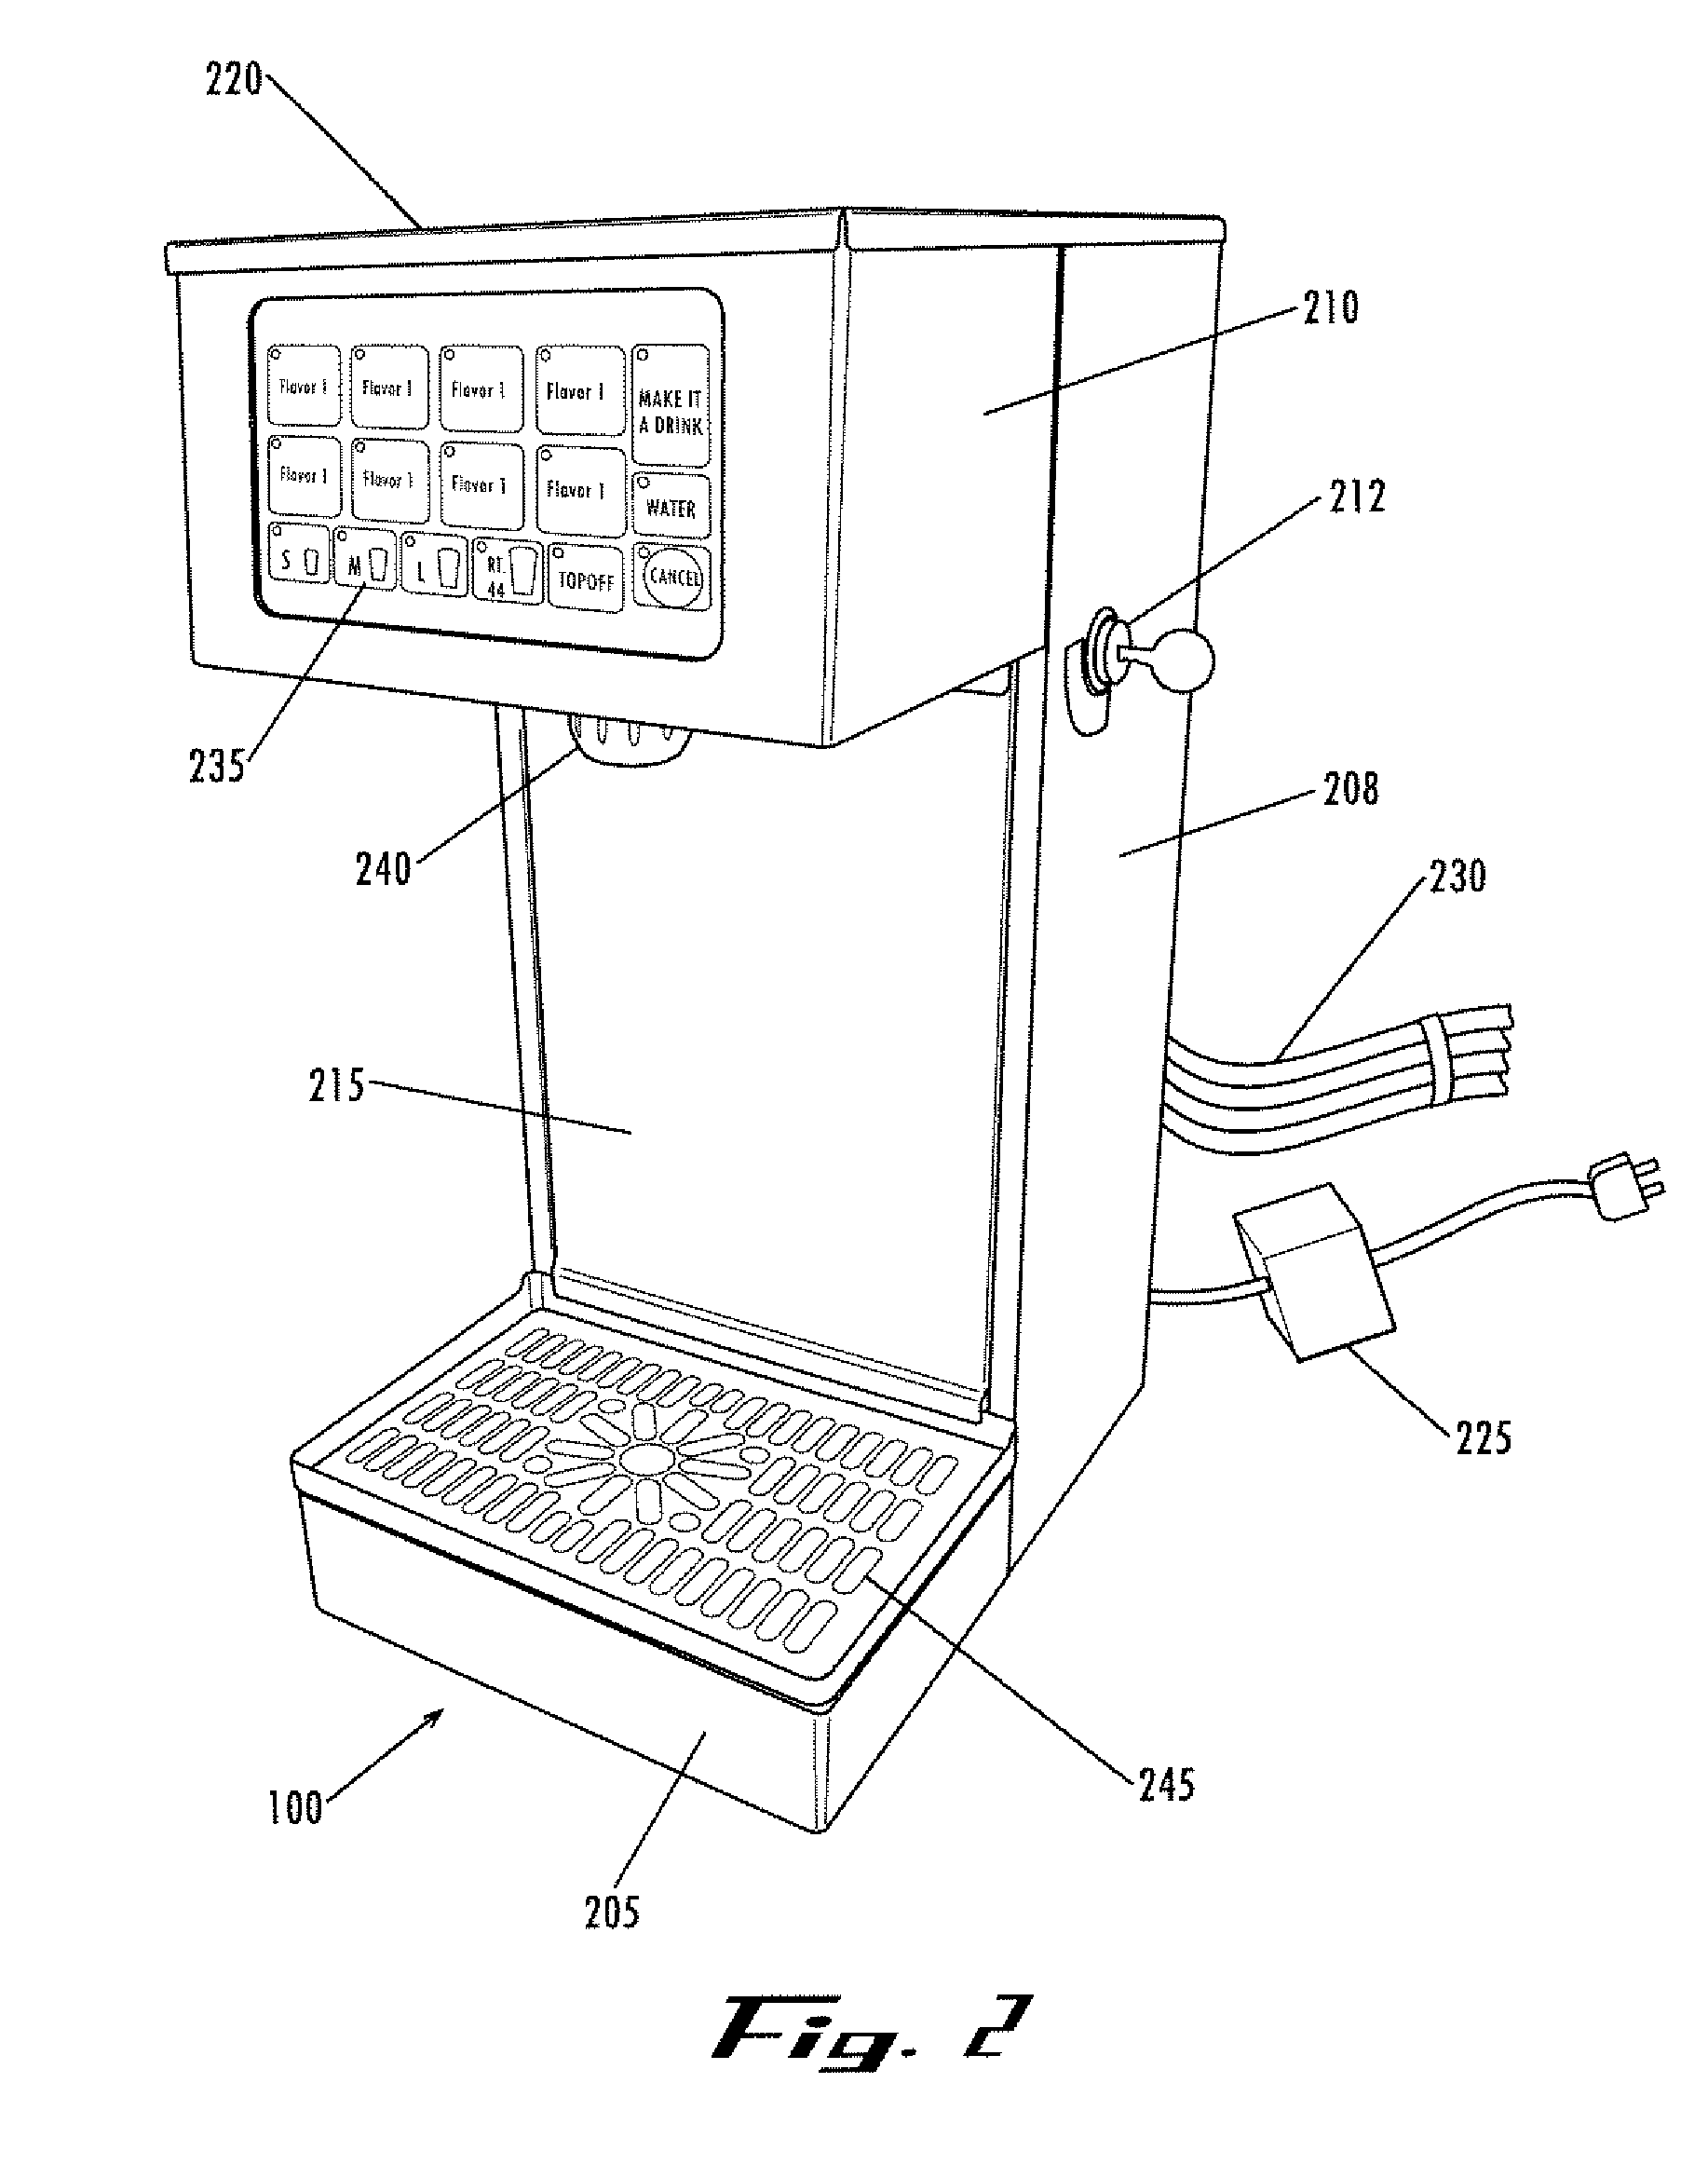 Systems and methods for dispensing flavor doses and blended beverages